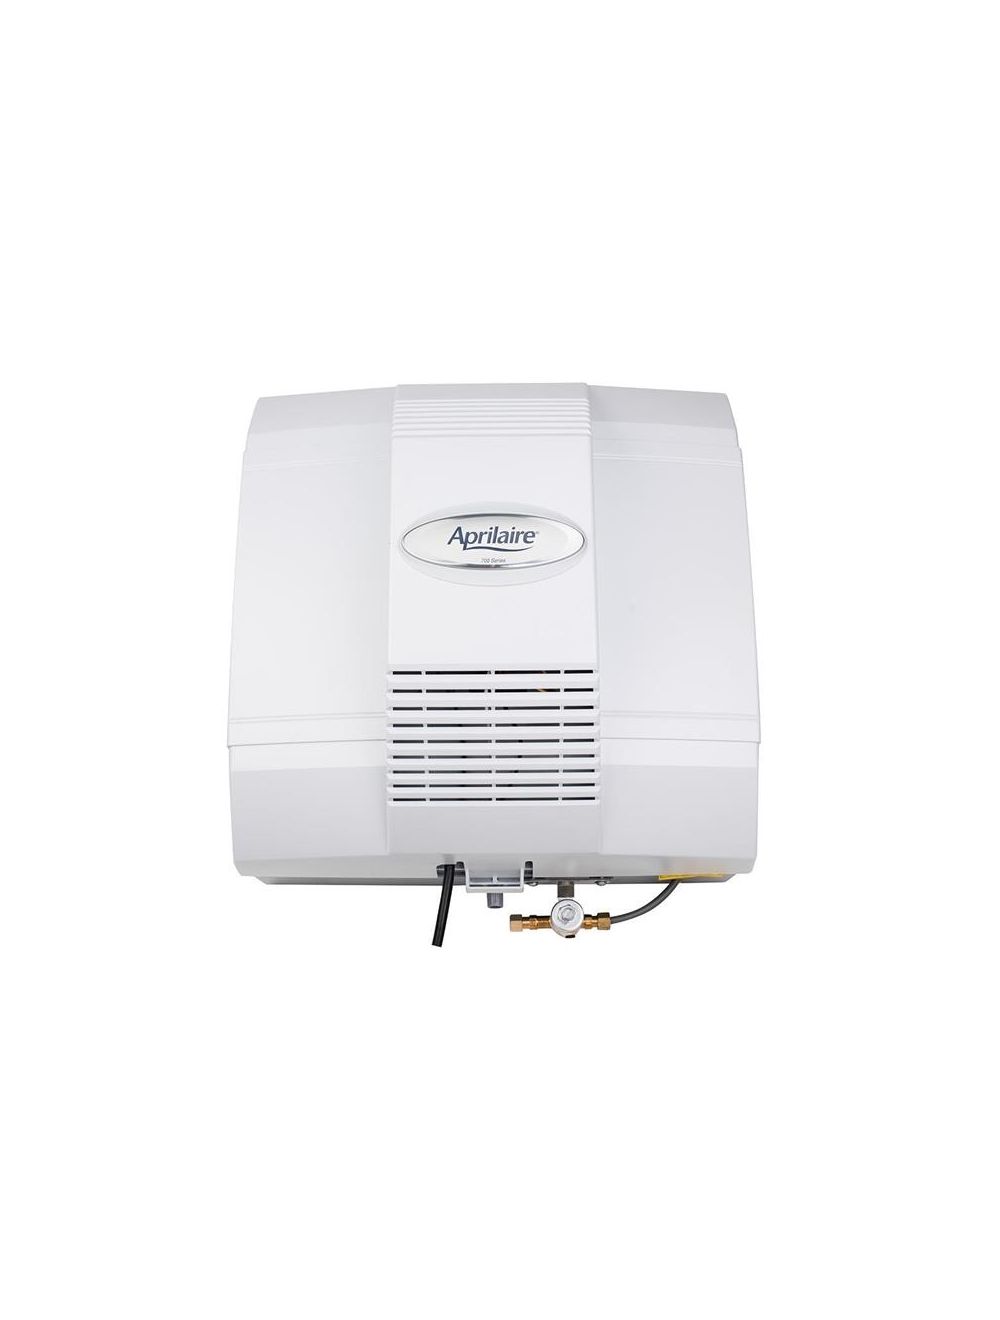 https://www.acdirect.com/media/catalog/product/cache/ccacc6d50c48fcabe22dd9dcc13199c9/a/p/aprilaire-700-humidifier-2.tmb-max640_1.jpg